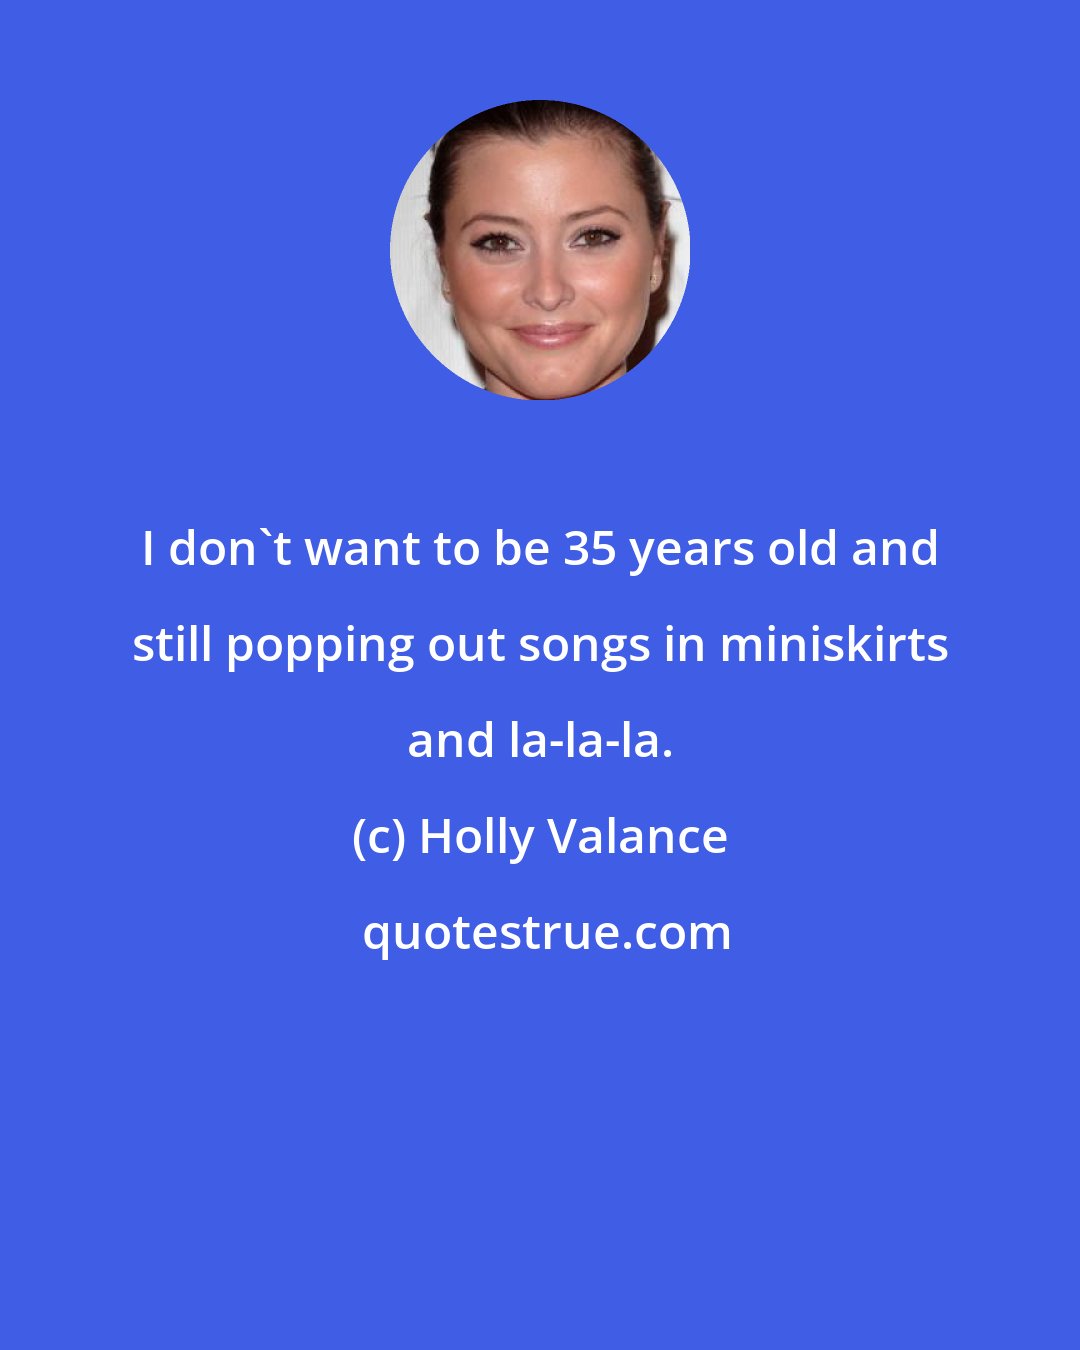 Holly Valance: I don't want to be 35 years old and still popping out songs in miniskirts and la-la-la.